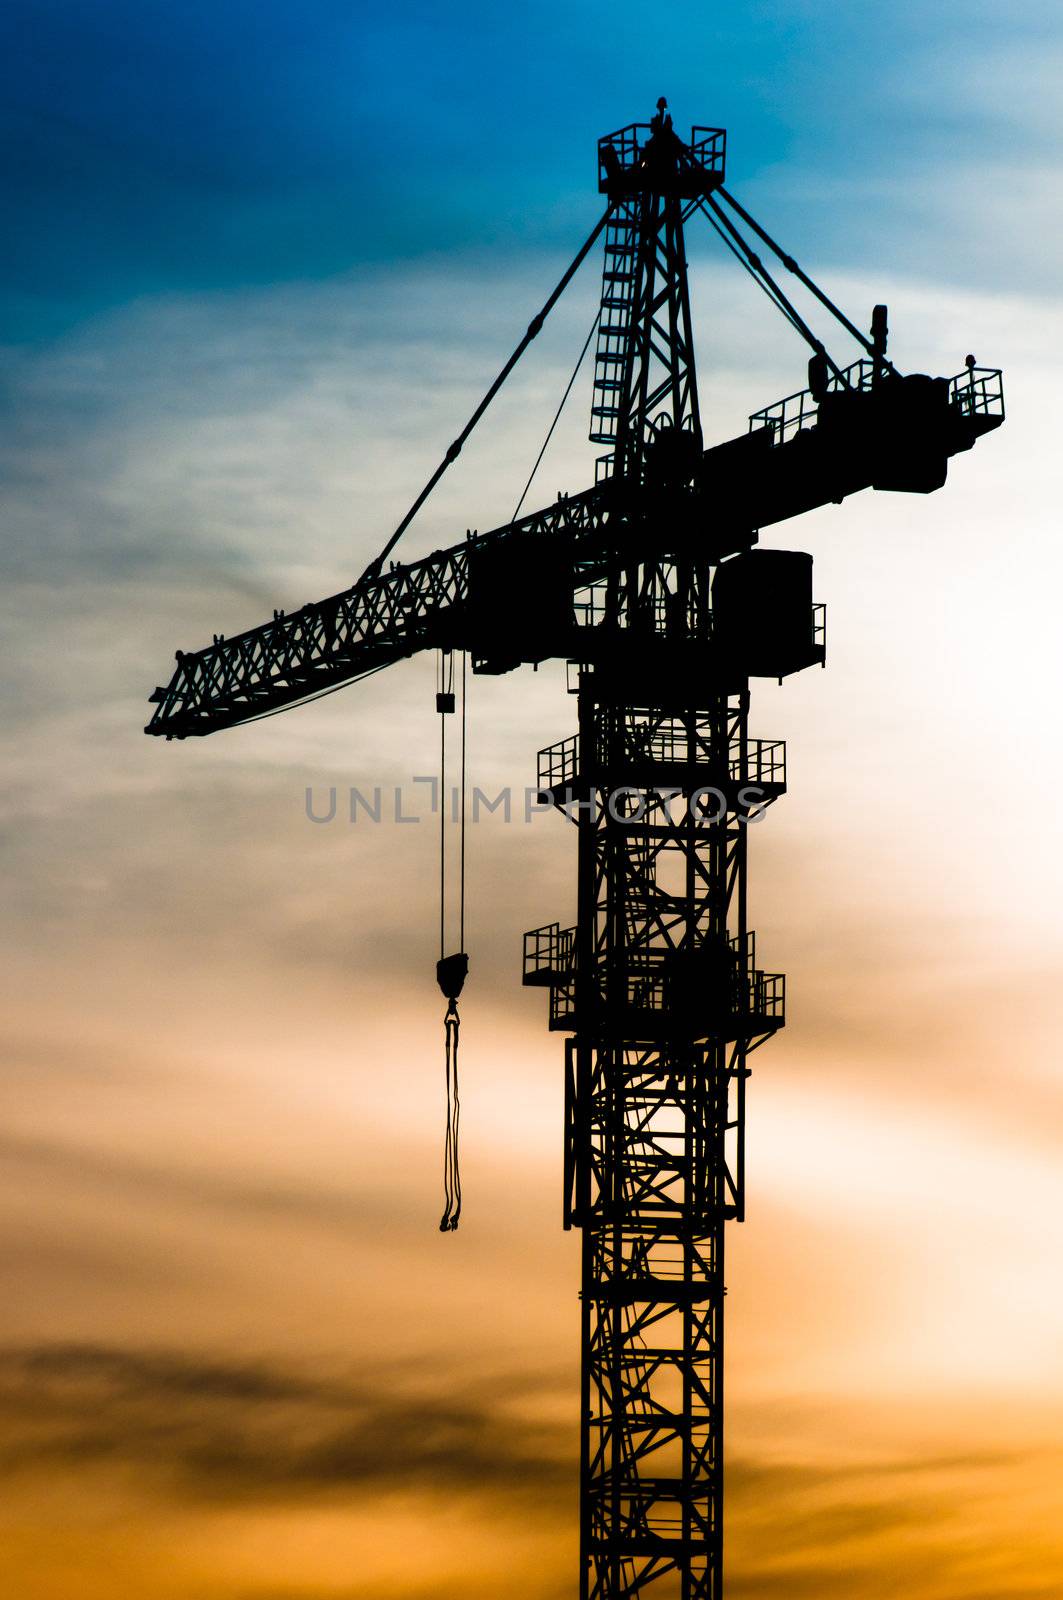 Top part of crane silhouette at the sunset time